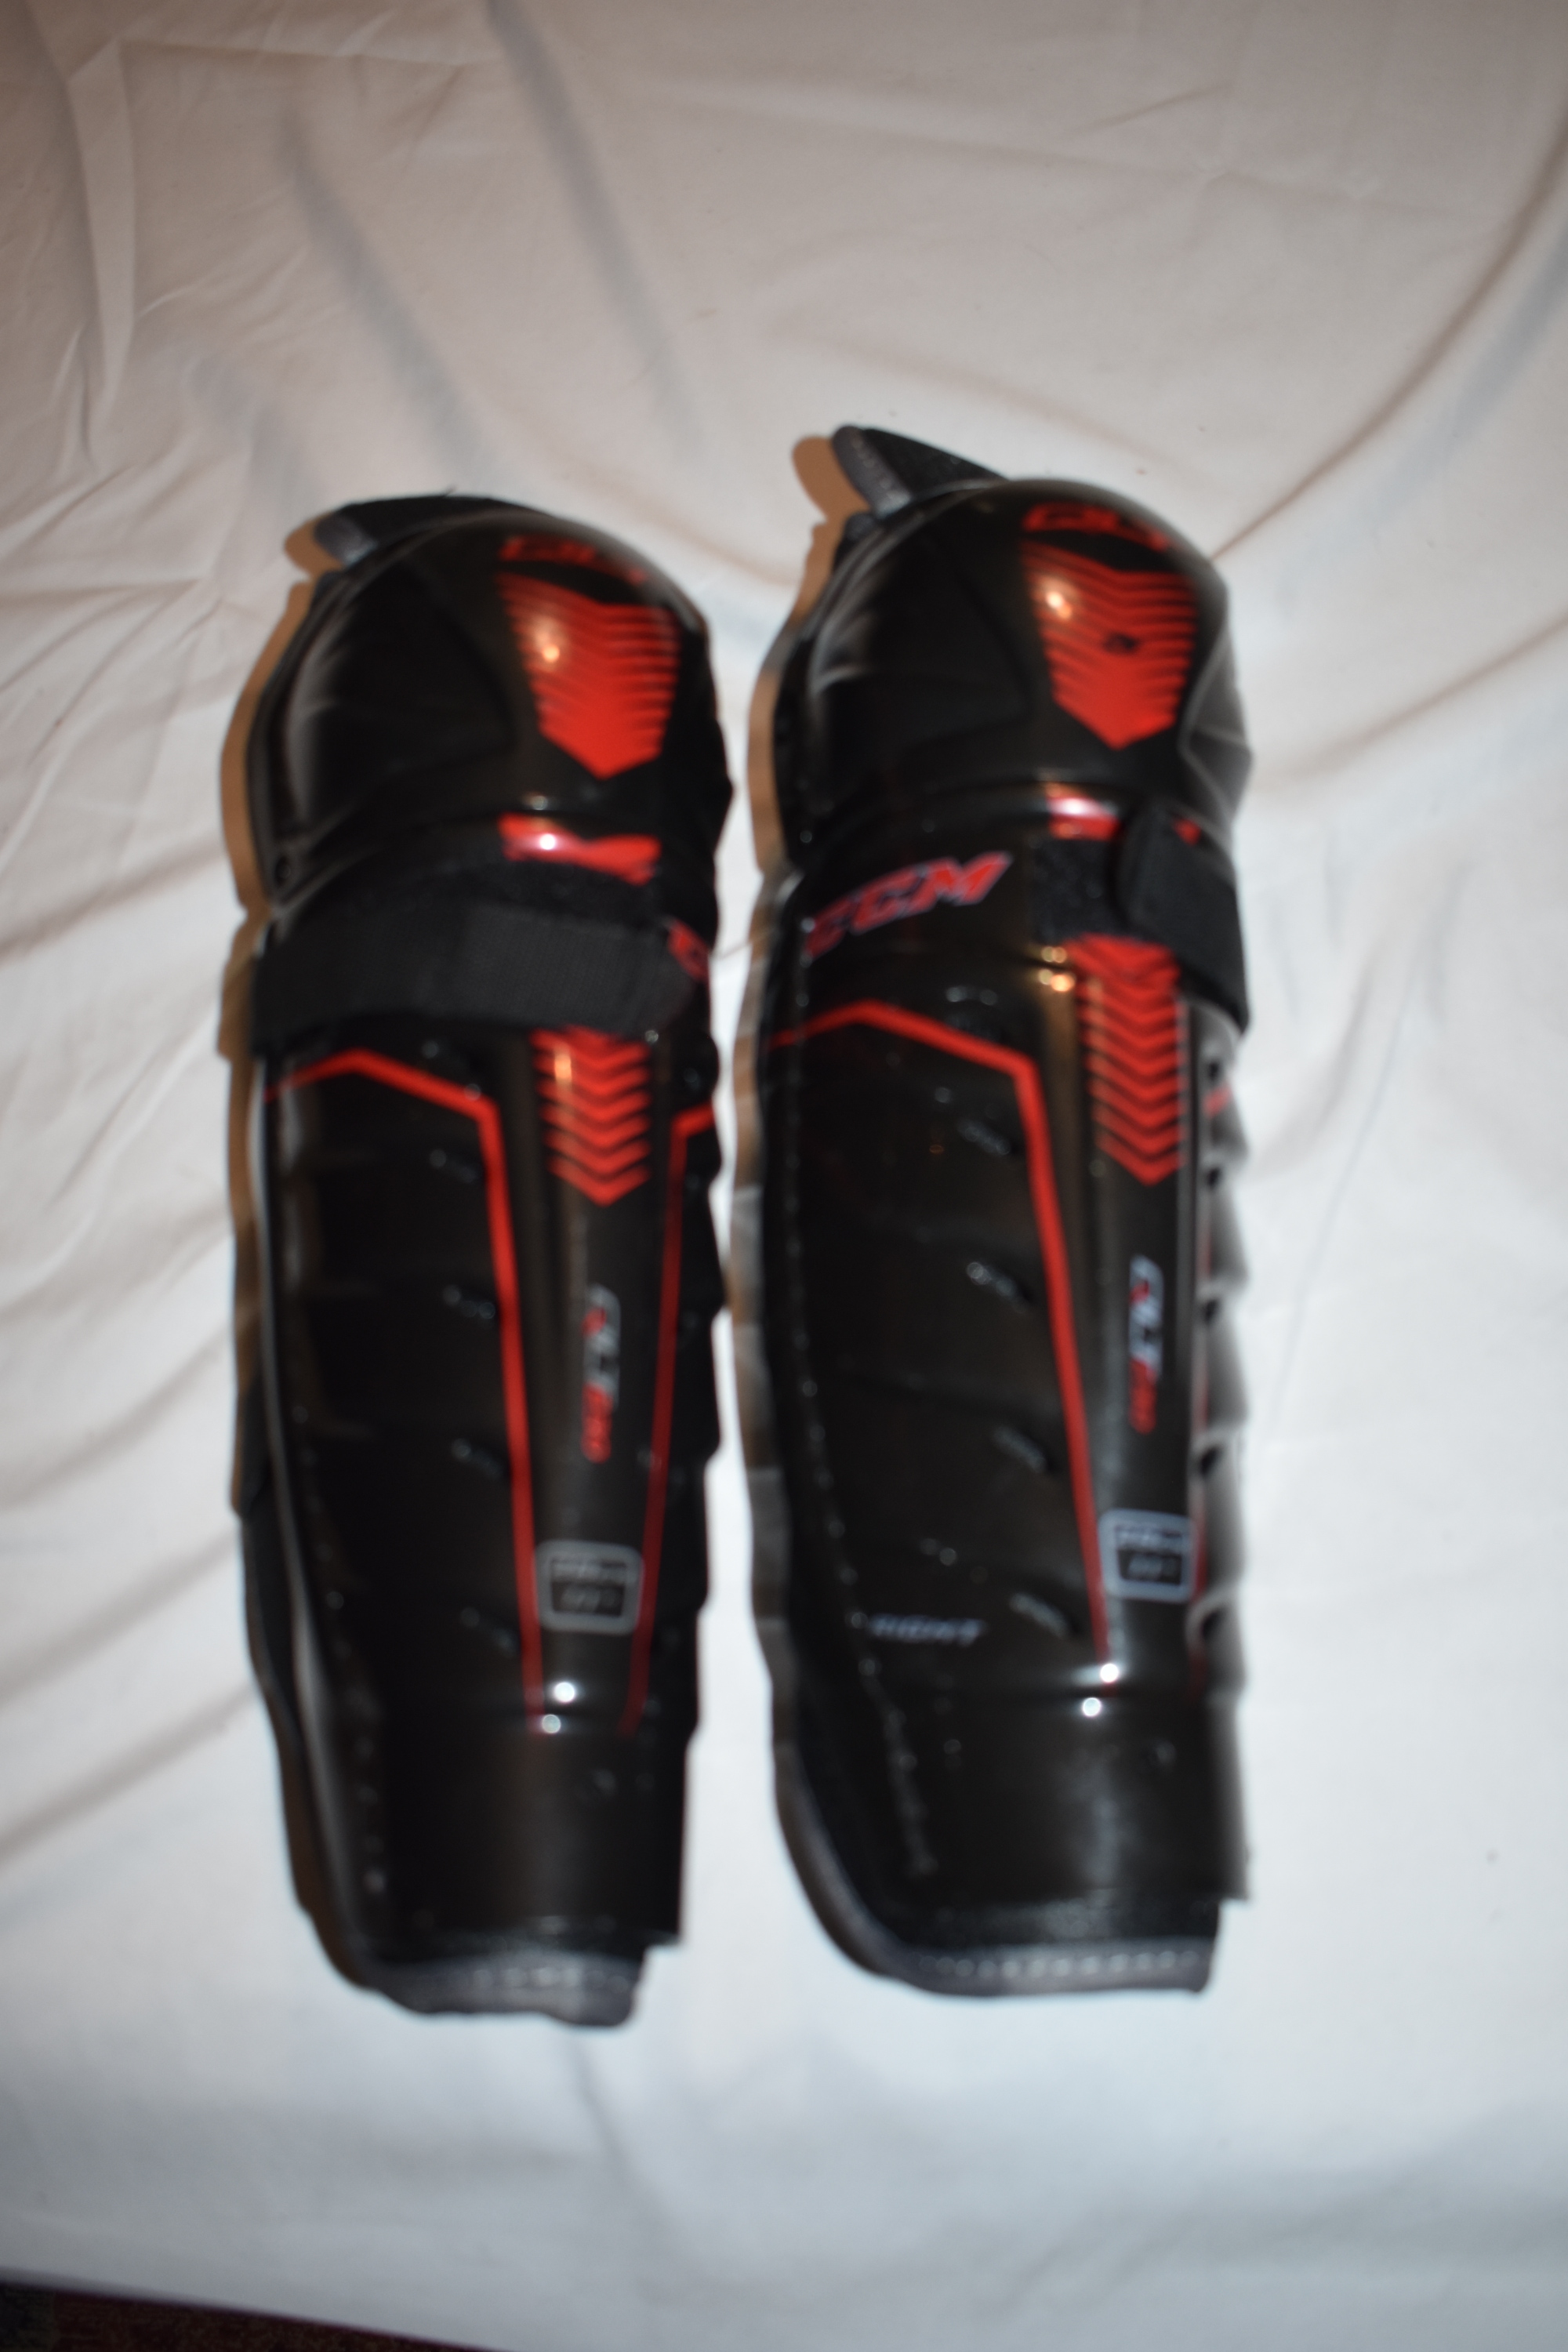 CCM QuickLite QLT230 Hockey Shin Pads, 11 Inches - Great Condition